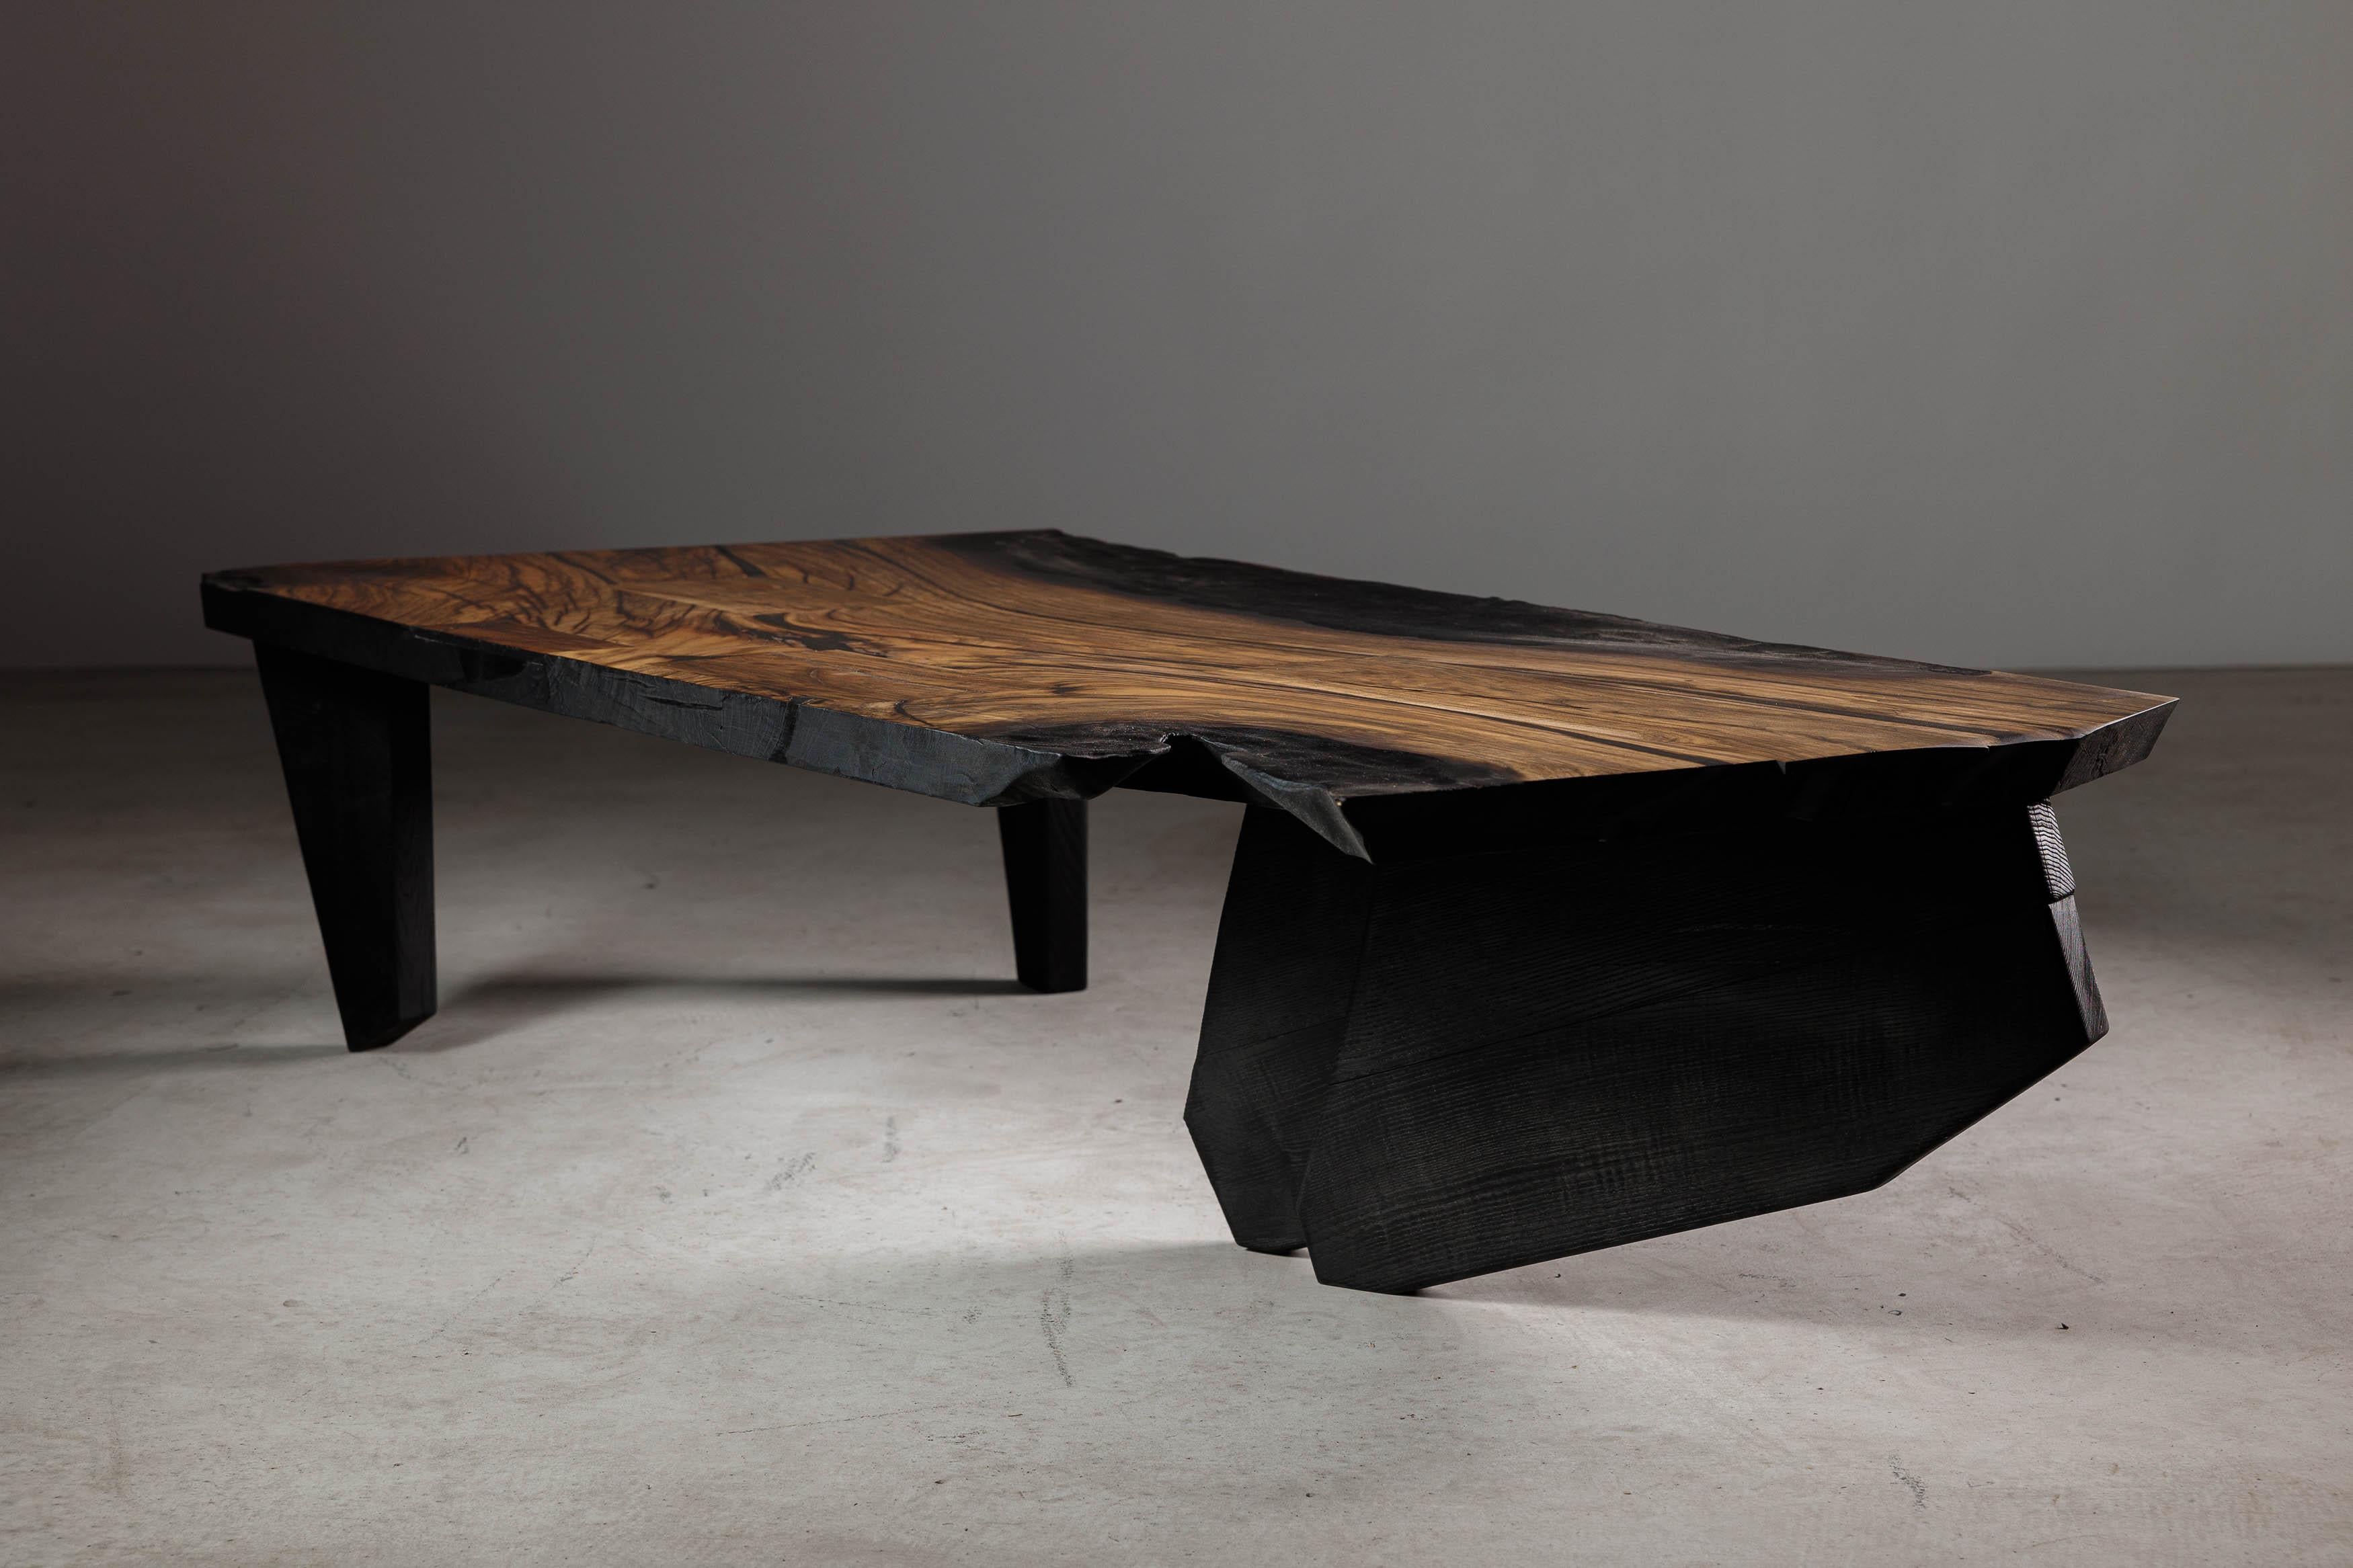 EM103 coffee table by Eero Moss
One of a kind
Dimensions; W 150 x D 74 x H 36 cm
Materials: Walnut, charred ash, India ink.
Finish: Natural oils.

18 Brut Collection

The latest collection by the artist is a tribute to the Brutalist